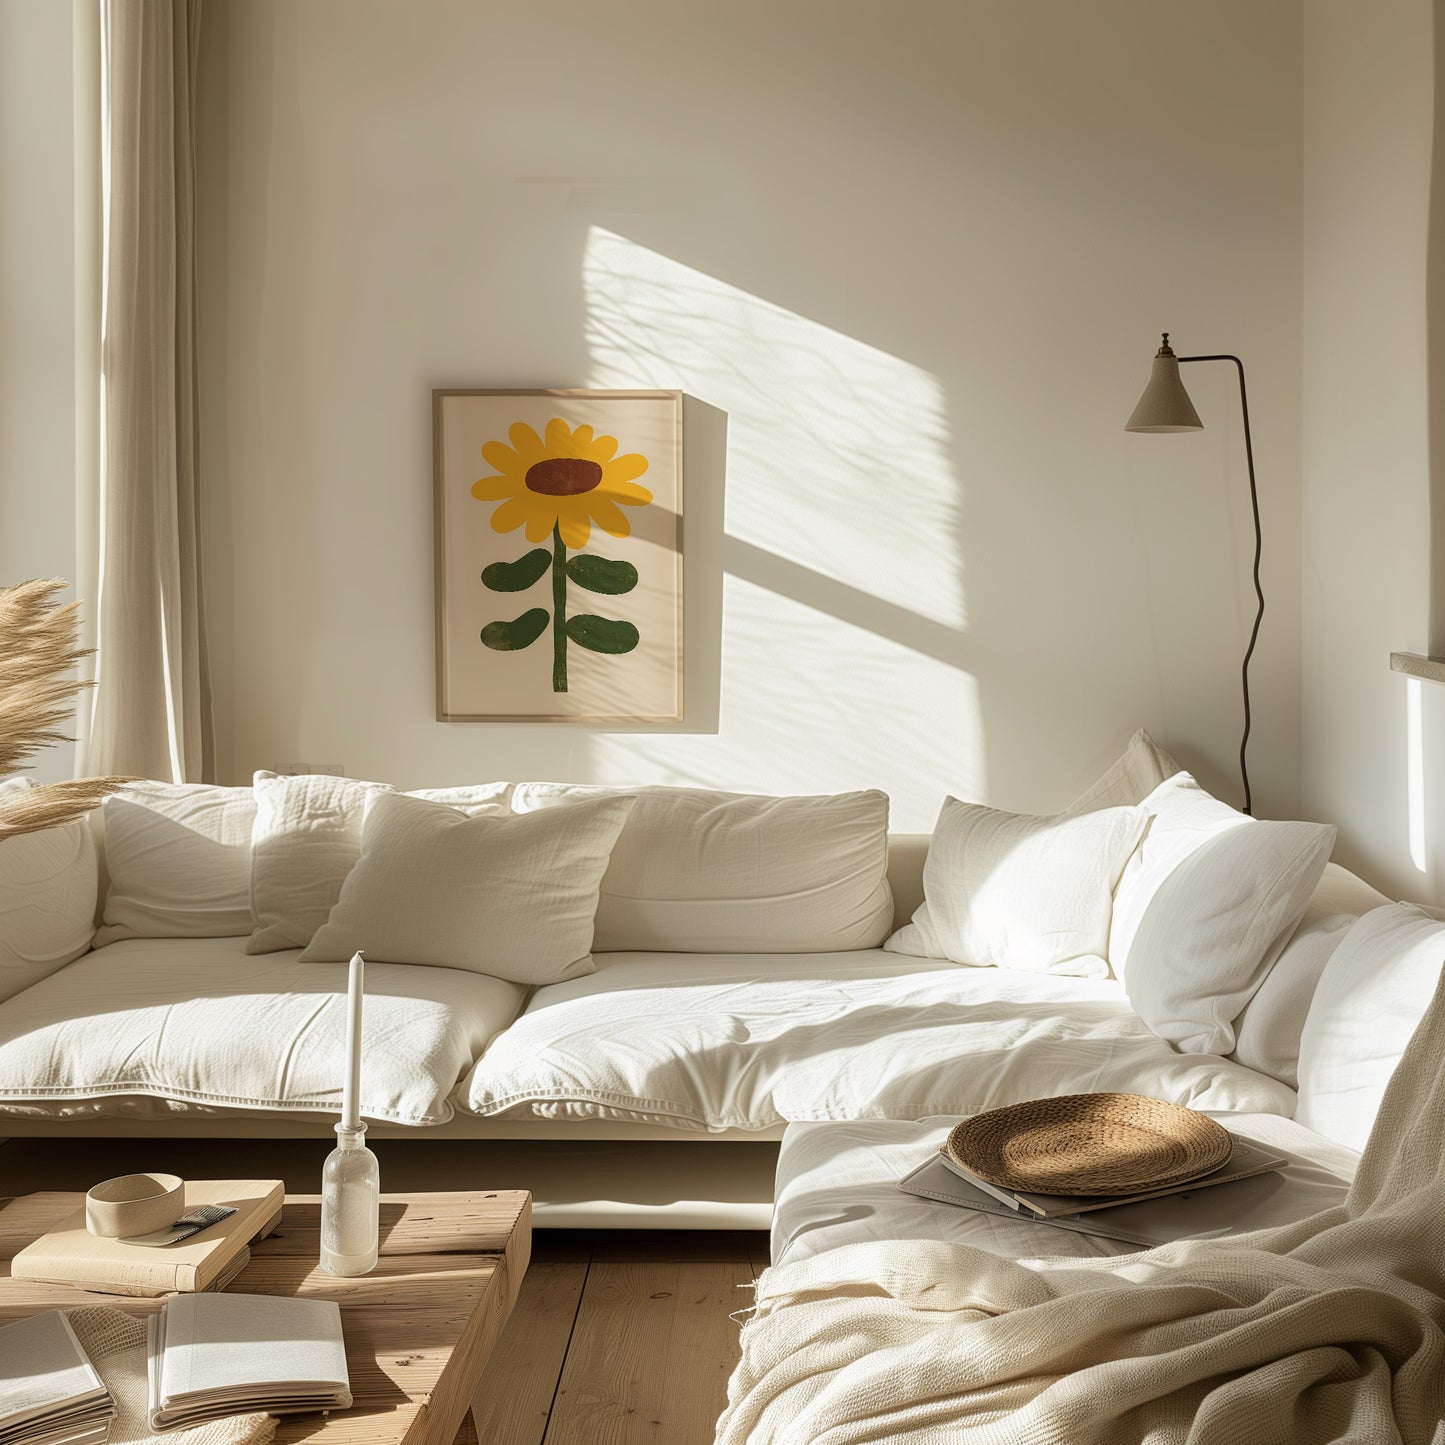 A cozy living room with a white sofa, sunflower painting, and soft sunlight.